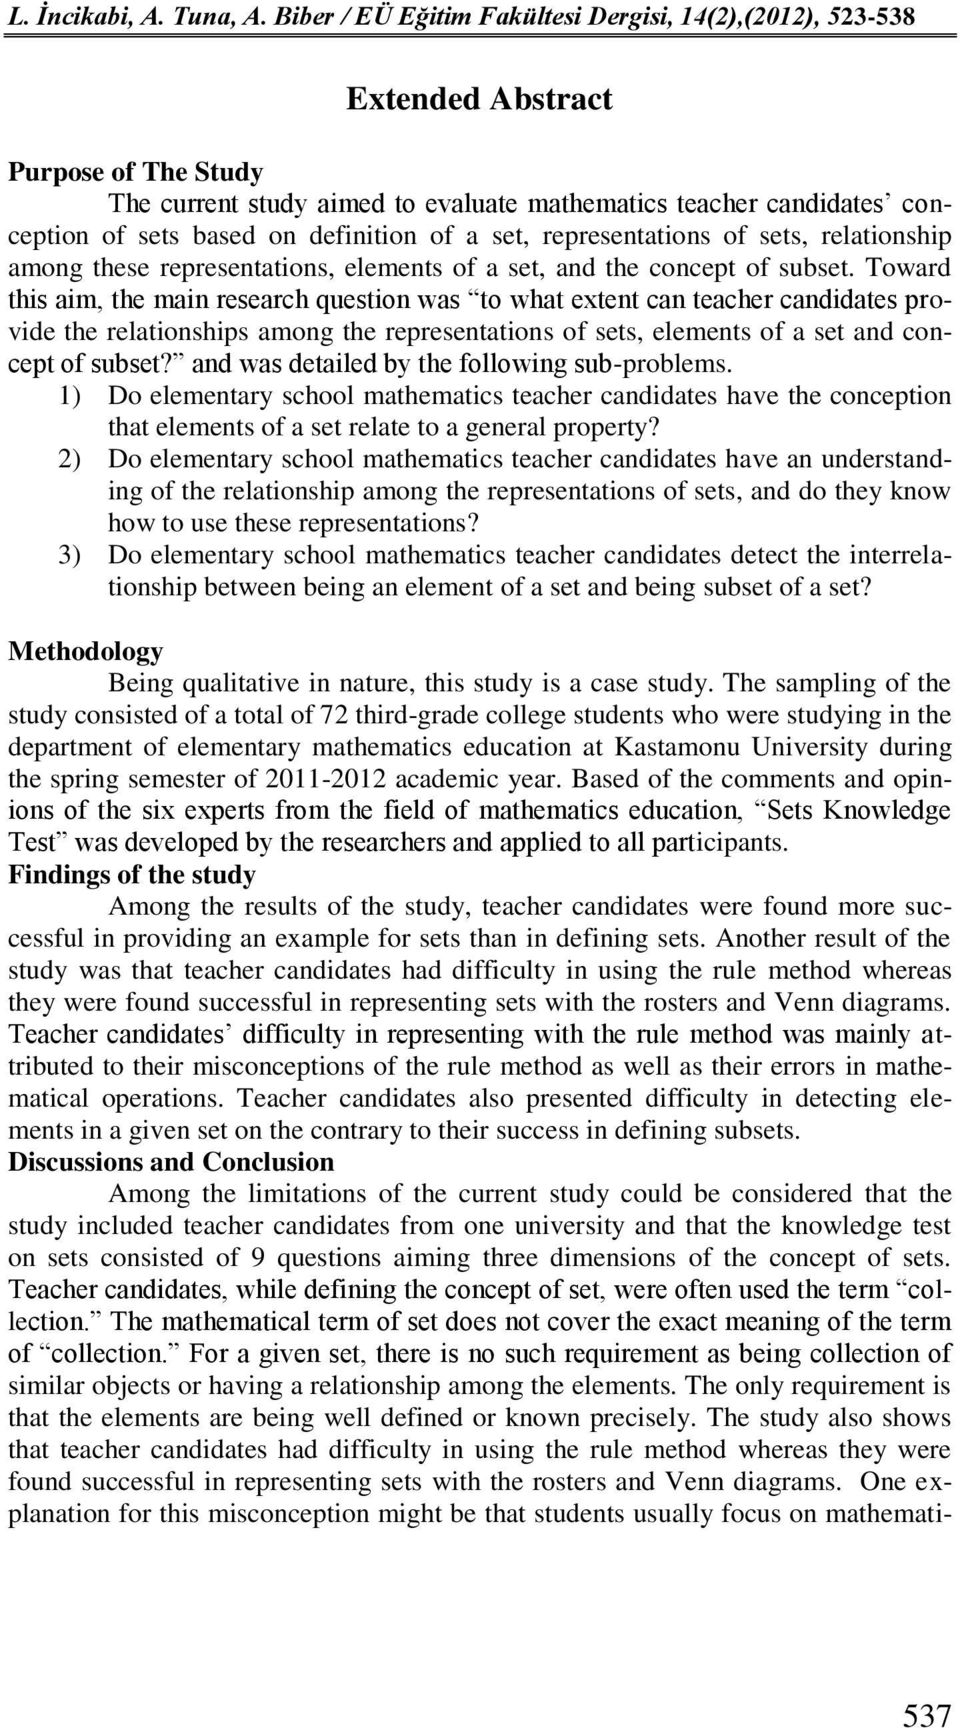 Toward this aim, the main research question was to what extent can teacher candidates provide the relationships among the representations of sets, elements of a set and concept of subset?